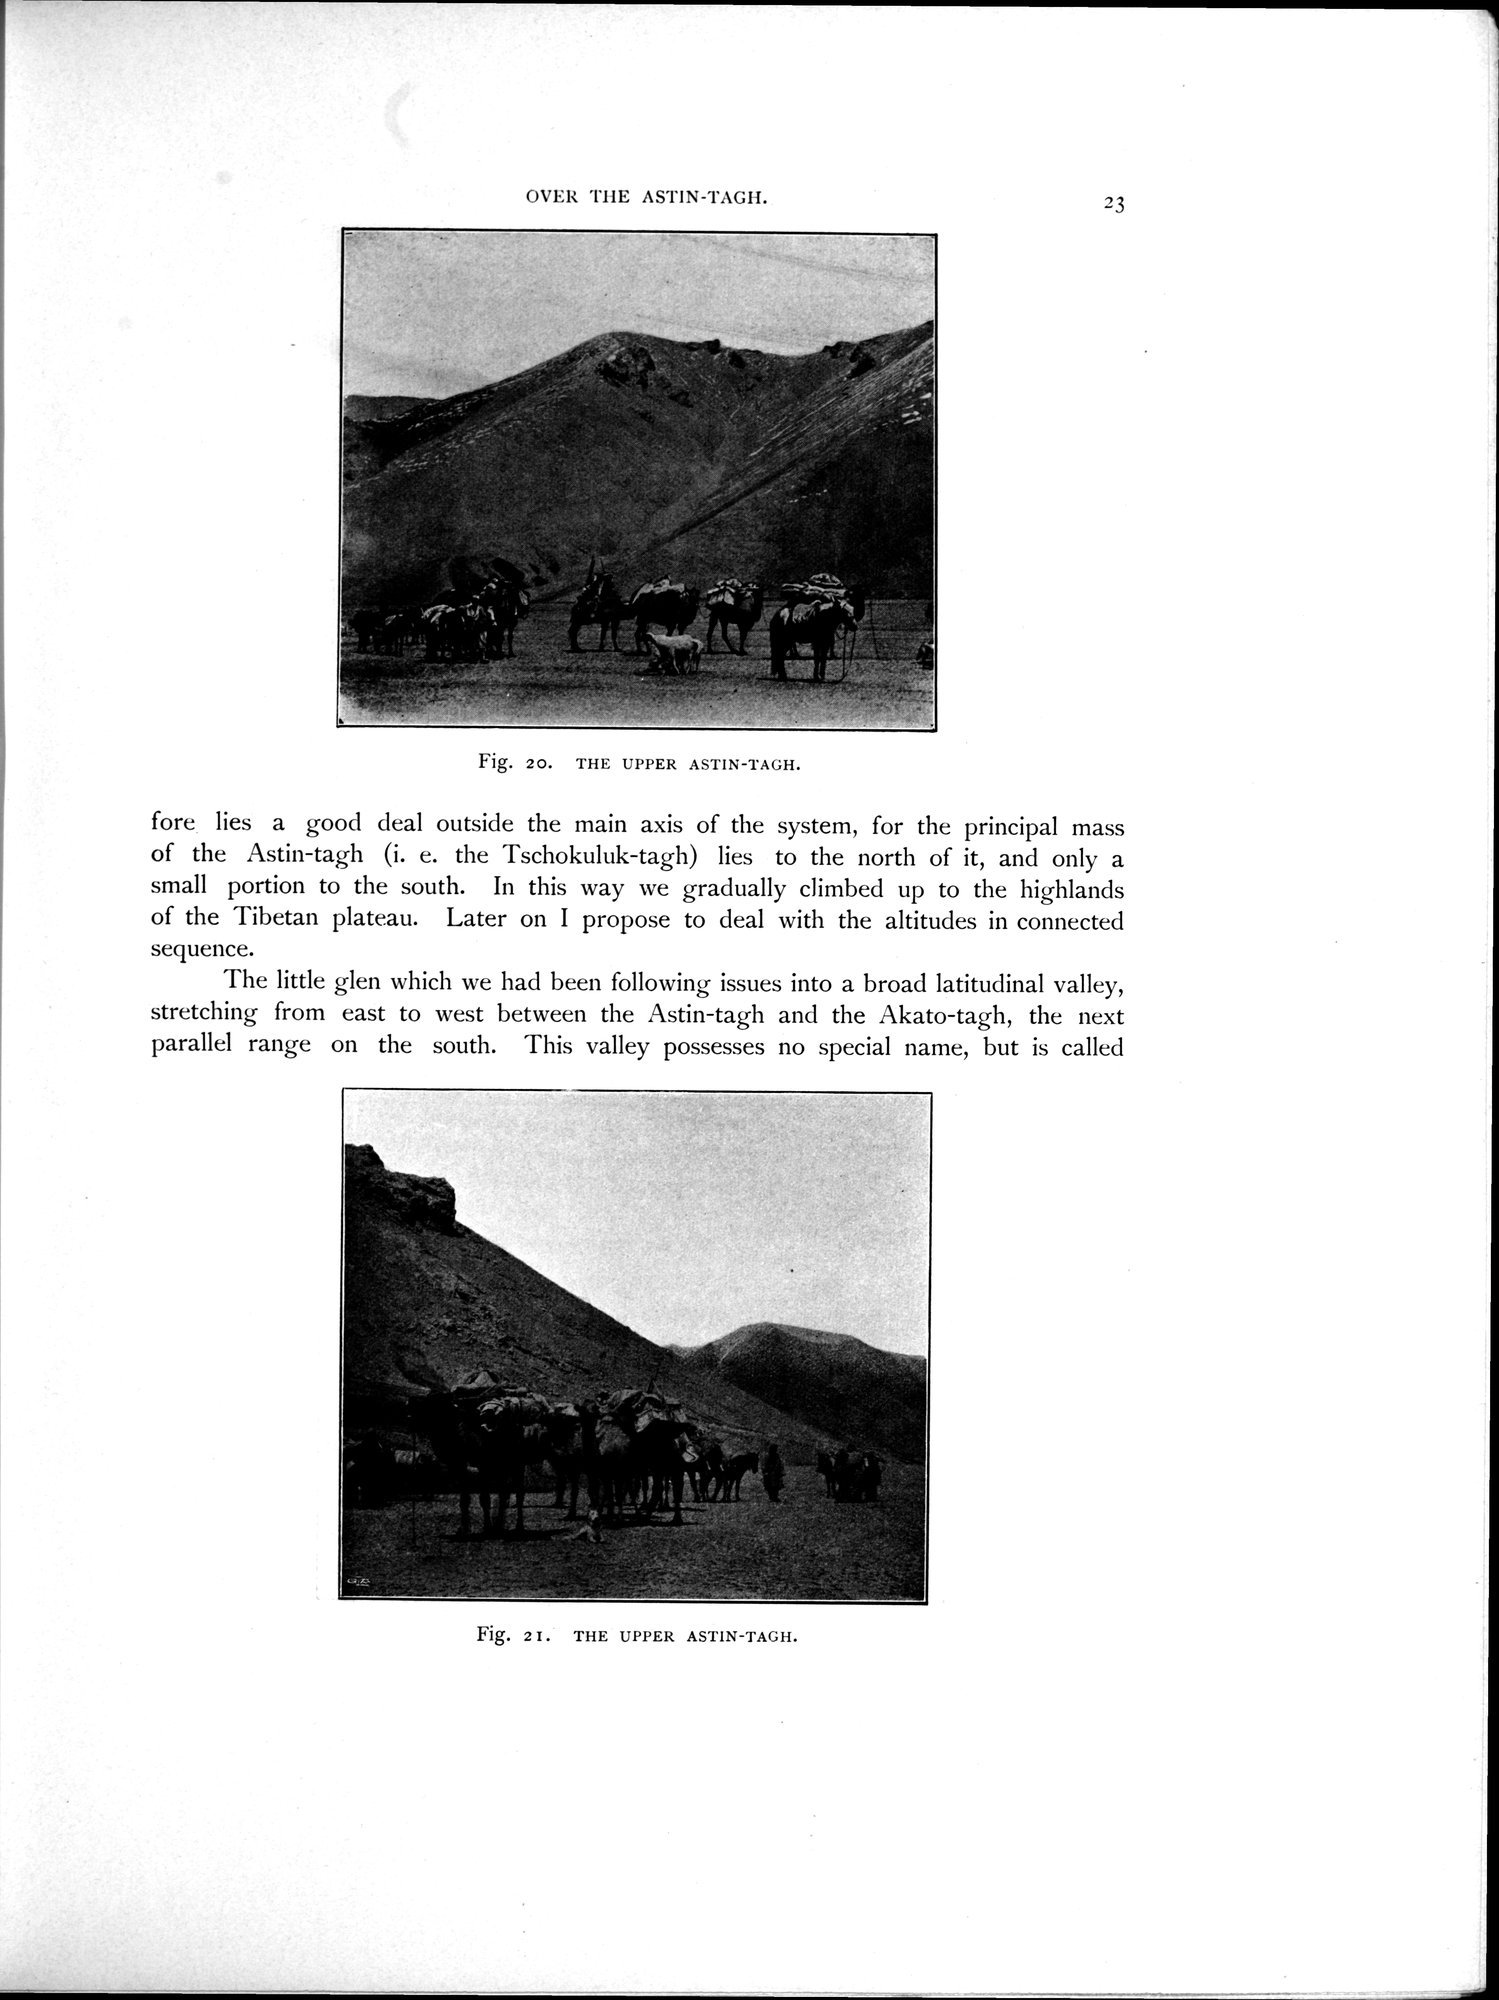 Scientific Results of a Journey in Central Asia, 1899-1902 : vol.3 / 35 ページ（白黒高解像度画像）